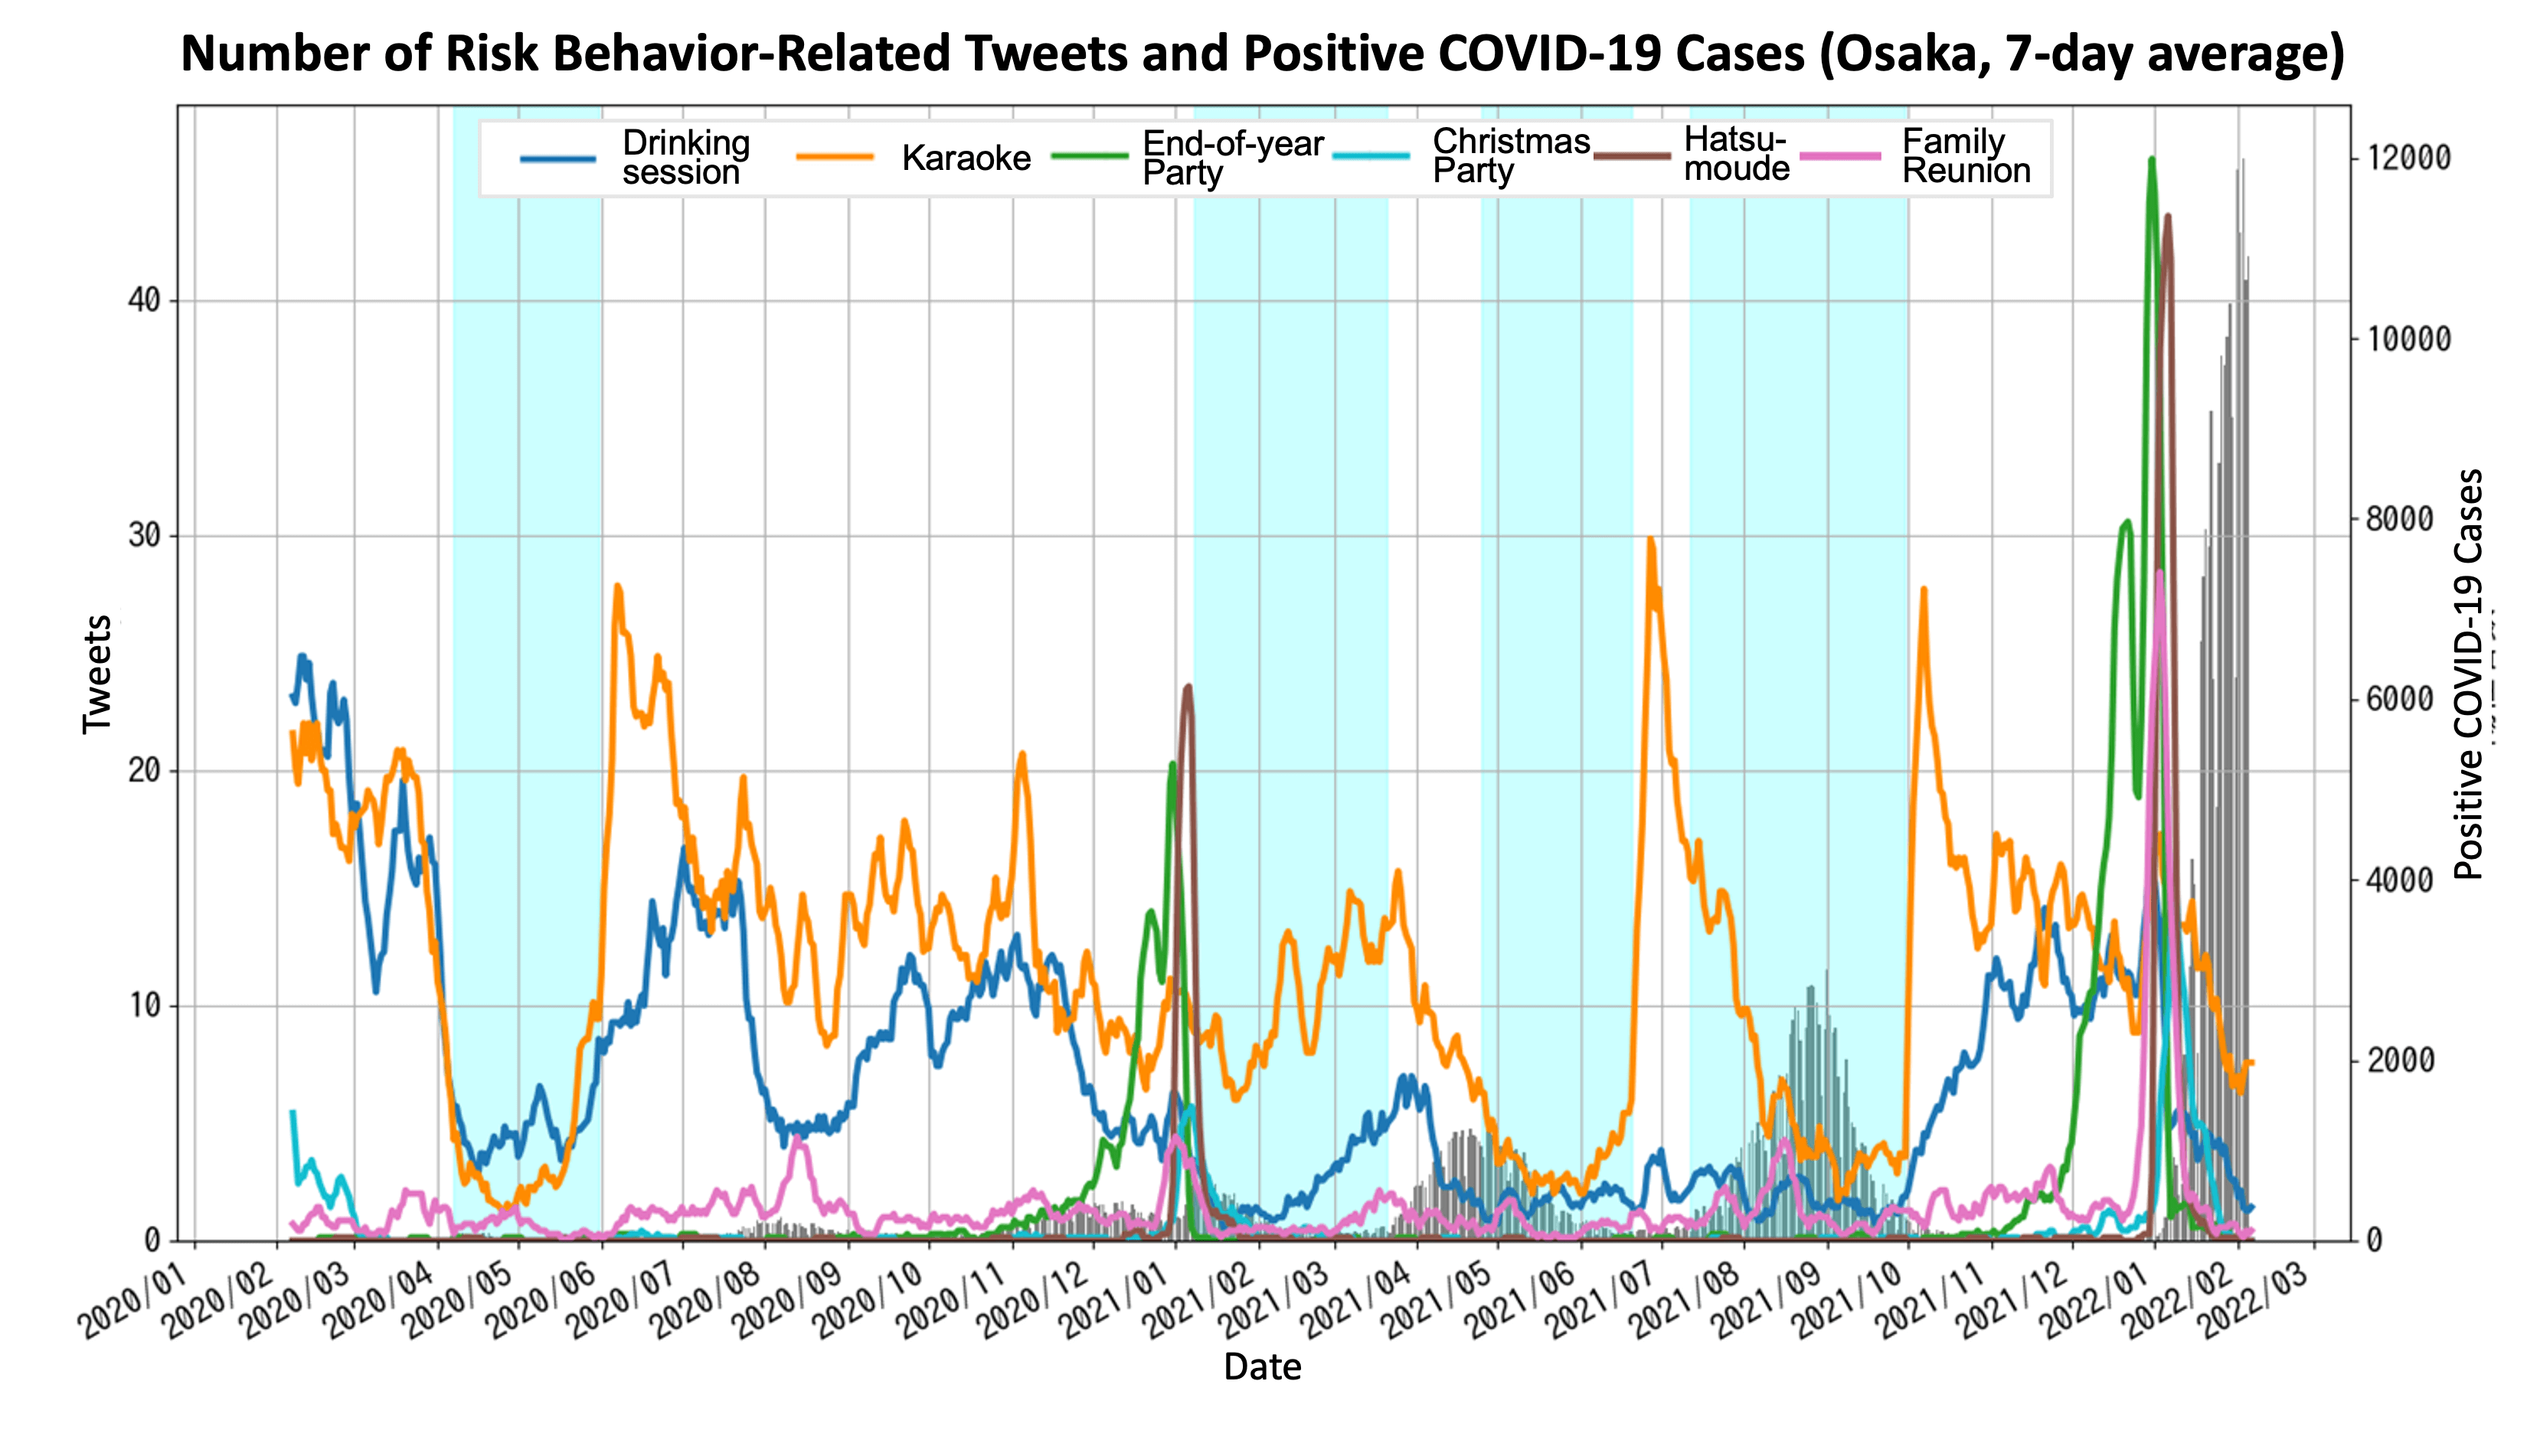 Number of Risk Behavior-Related Tweets and Positive COVID-19 Cases